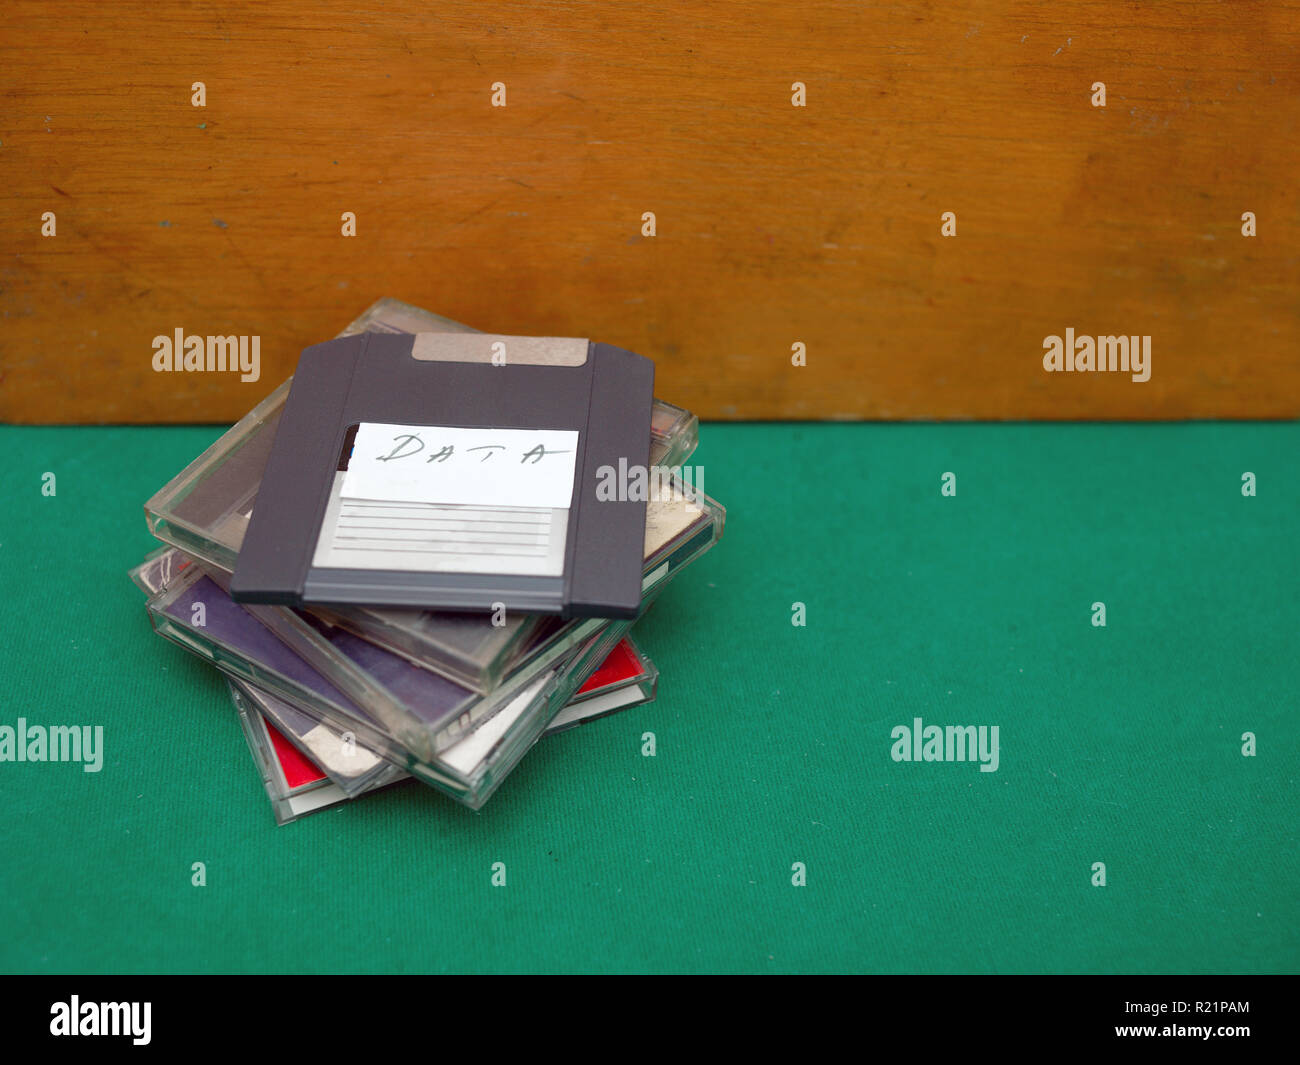 Bunch of relic floppy discs laid on the table, concept of outdated technology Stock Photo